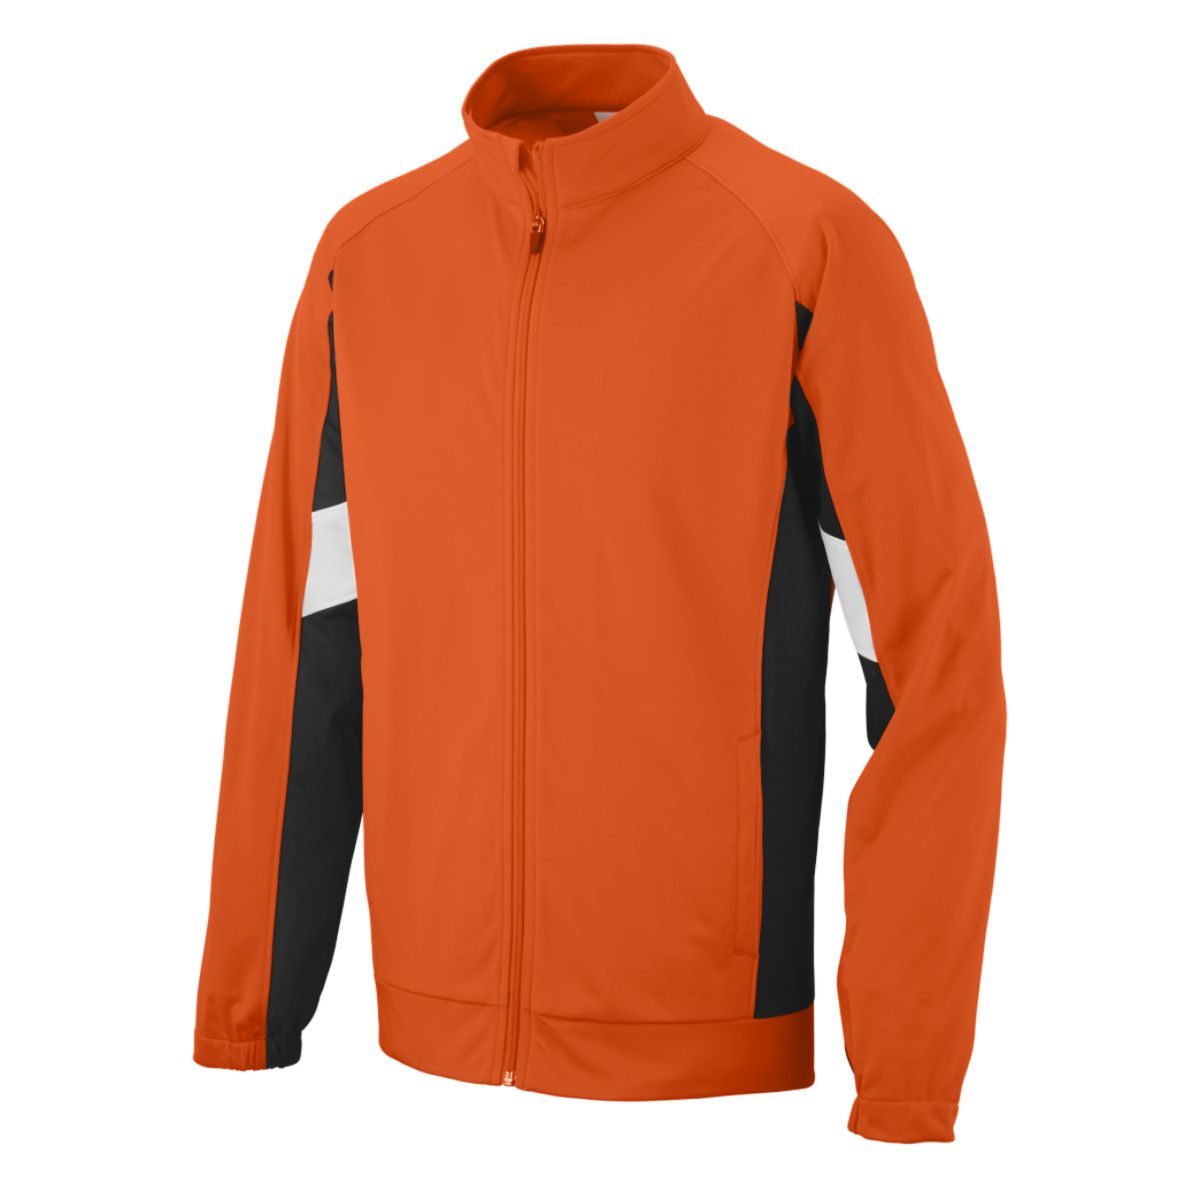 Augusta Sportswear Tour De Force Jacket in Orange/Black/White  -Part of the Adult, Adult-Jacket, Augusta-Products, Outerwear product lines at KanaleyCreations.com